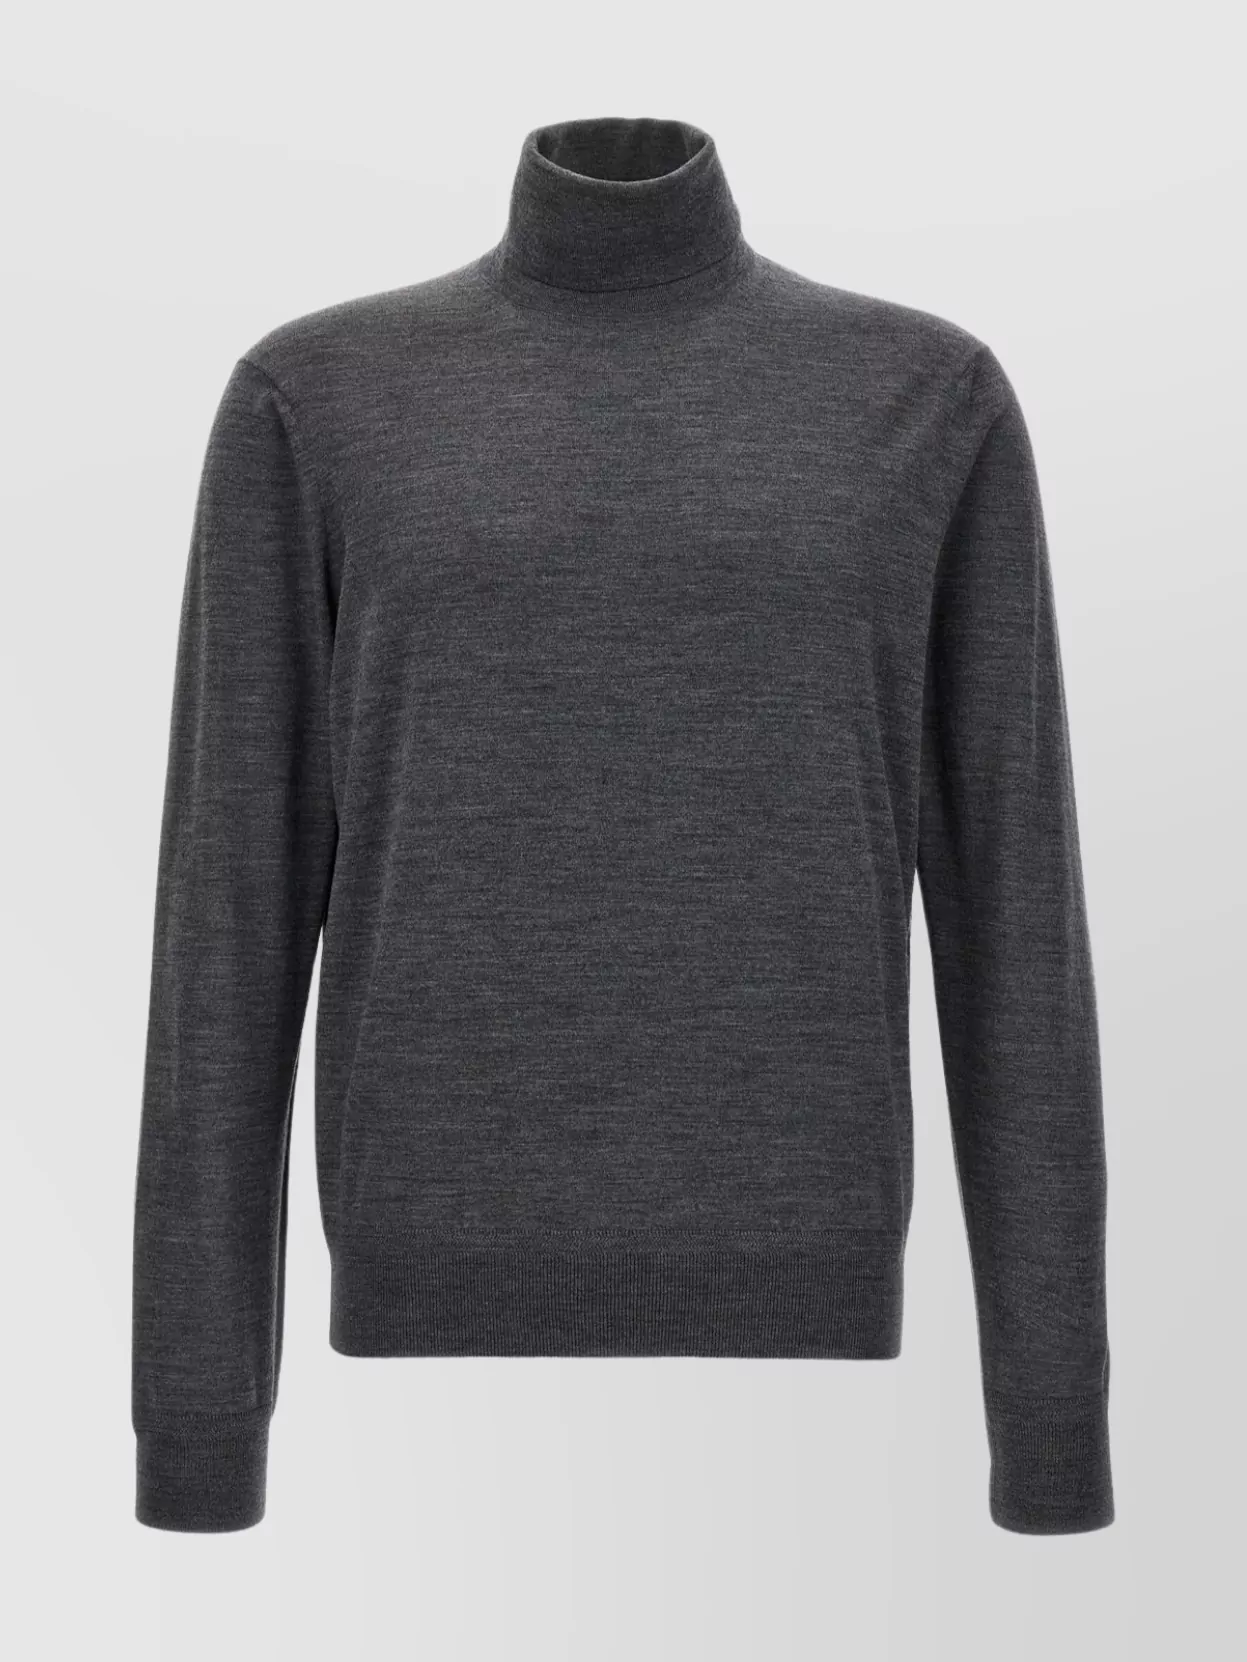 Tom Ford Cozy High Neck Knit Sweater